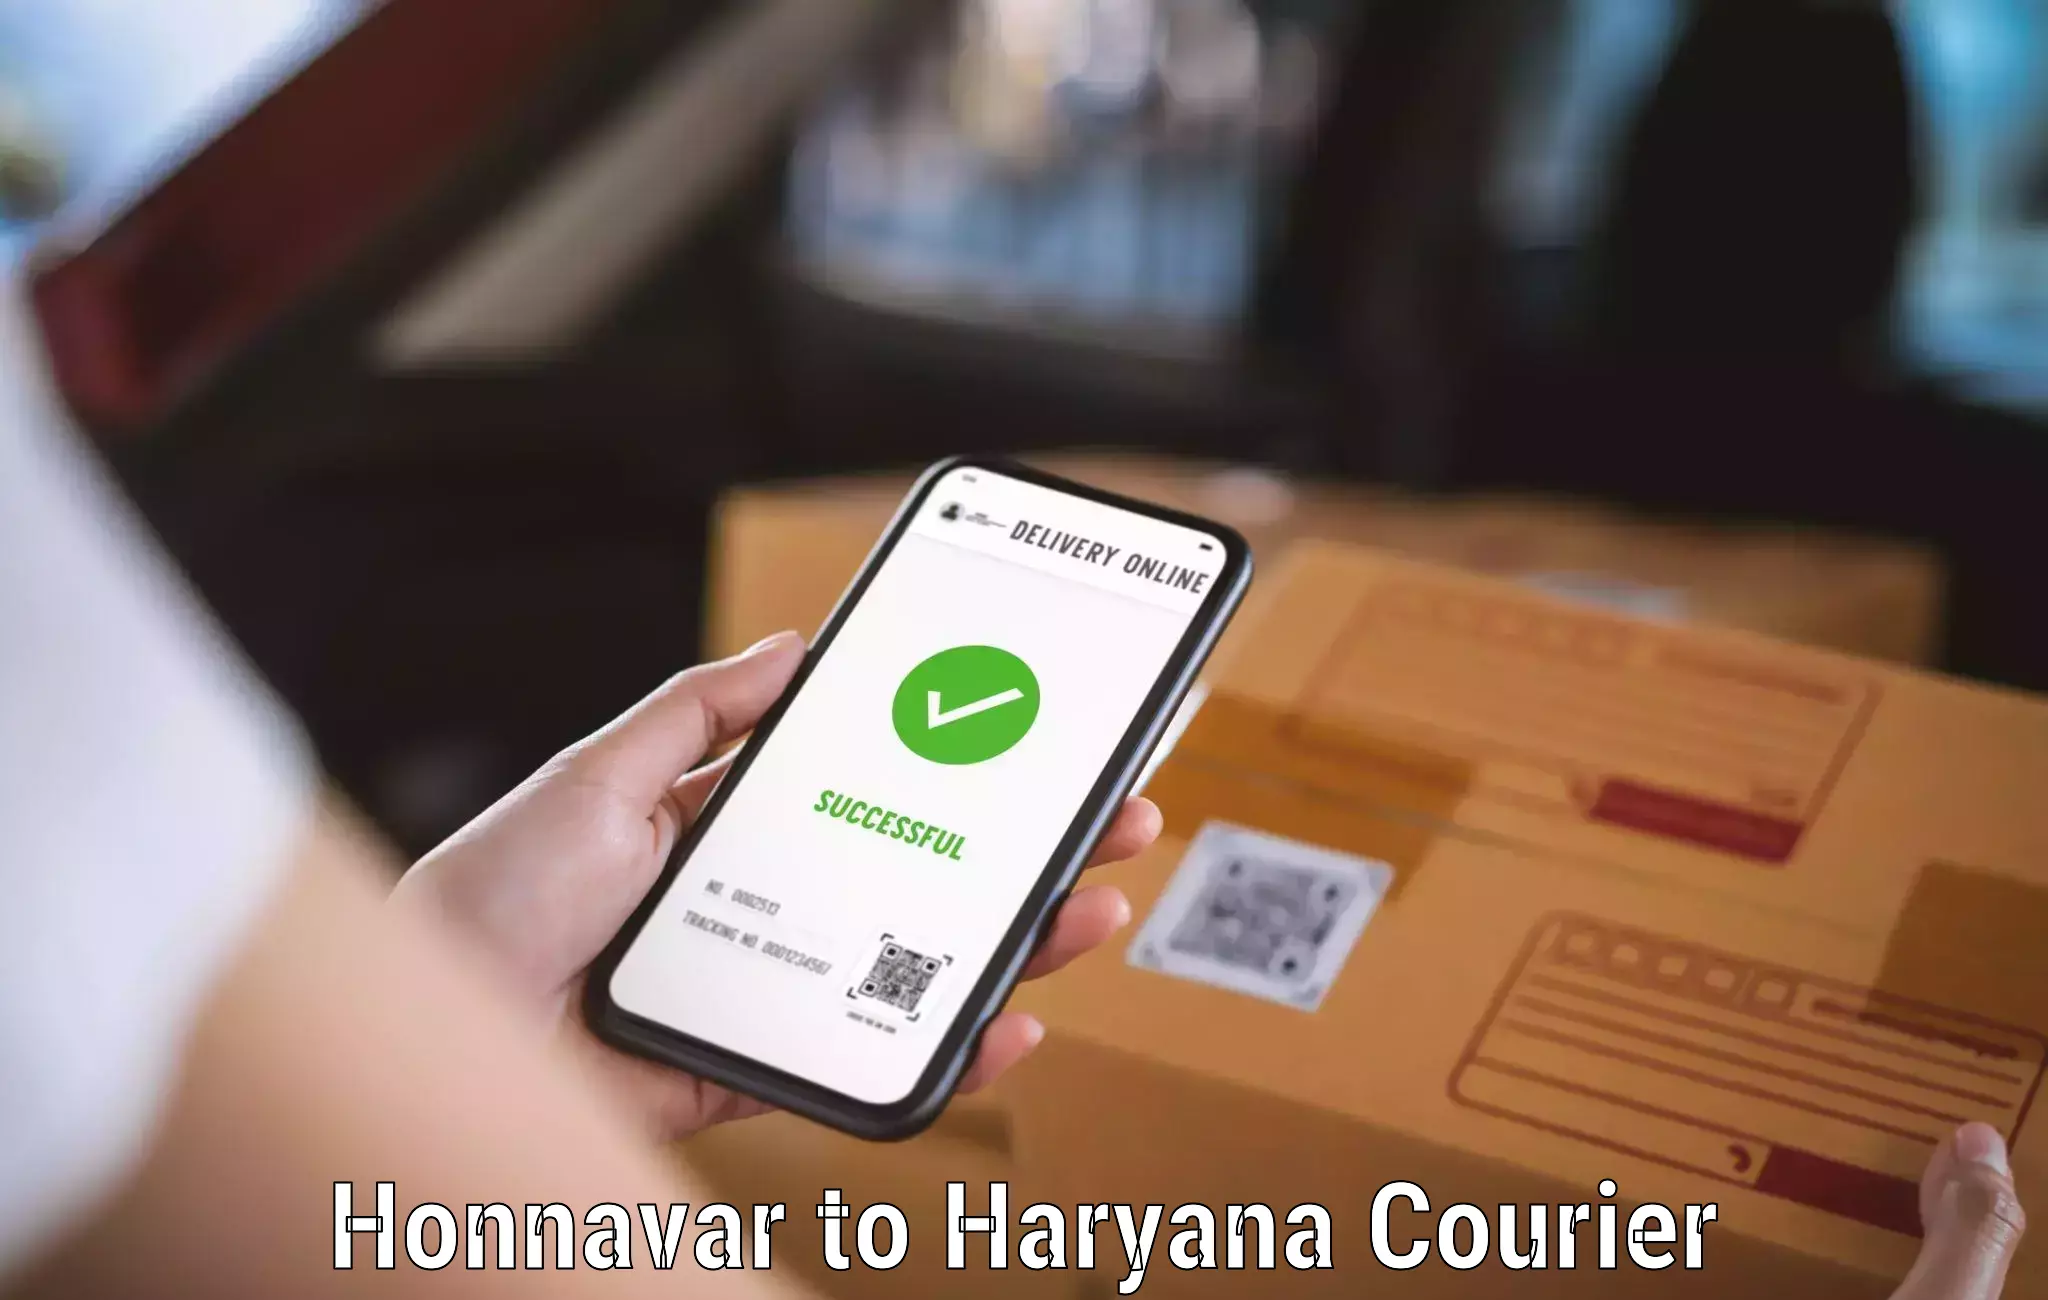 Fast delivery service Honnavar to Bhuna